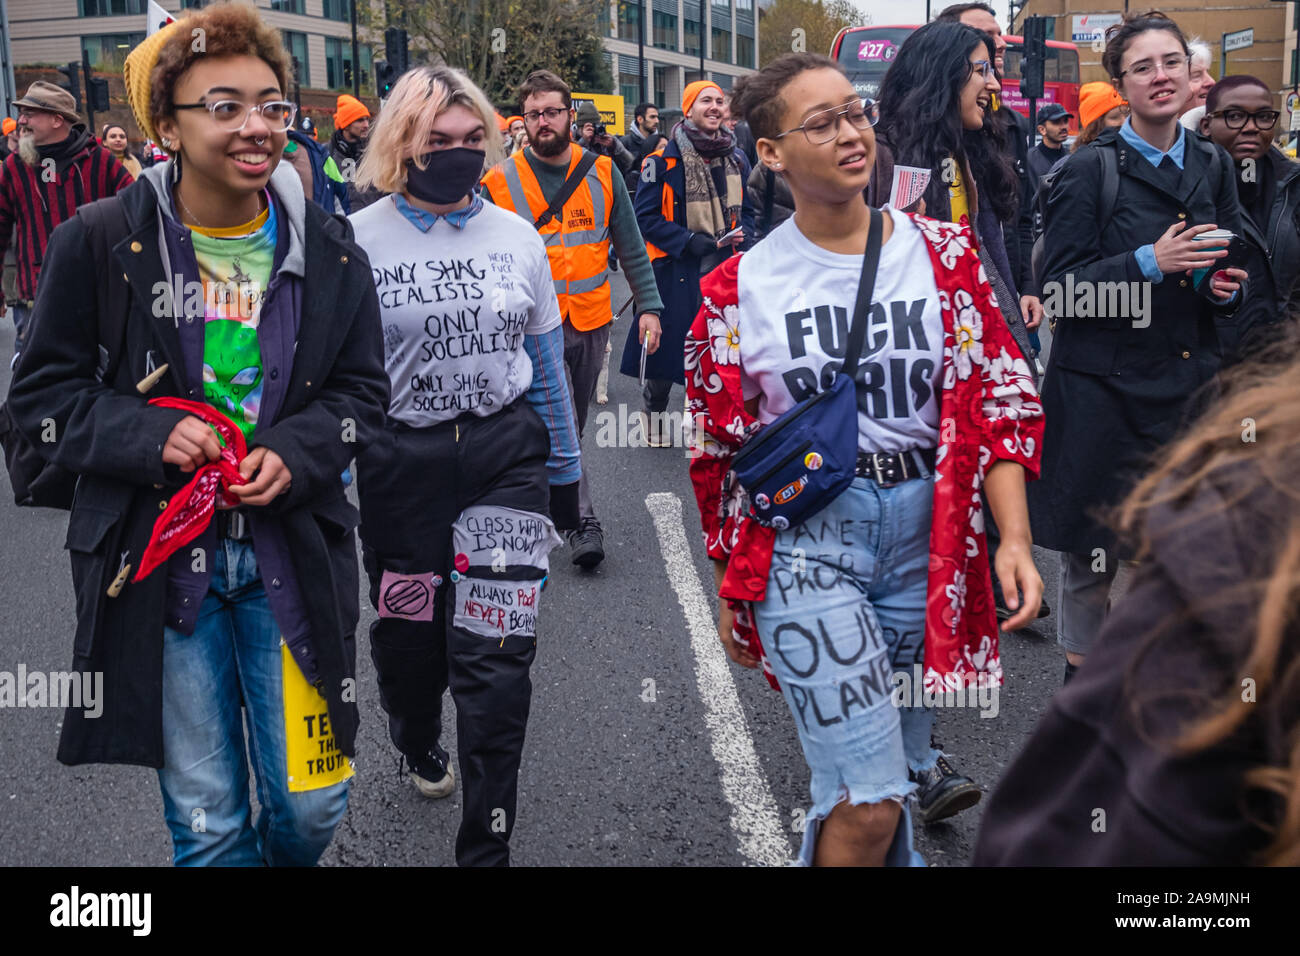 London, UK. 16th November 2019. Protesters from FCKBoris in orange knitted hats walk through Uxbridge  urging everyone to register and vote against Boris Johnson and kick him out for his racist, elitist politics. They marched with a sound system on a bus to Brunel University to persuade students. Johnson had a majority of just over 5 thousand in 2017 and Labour candidate Ali Milani has strong hopes of beating him and the other 10 candidates. Peter Marshall/Alamy Live News Stock Photo